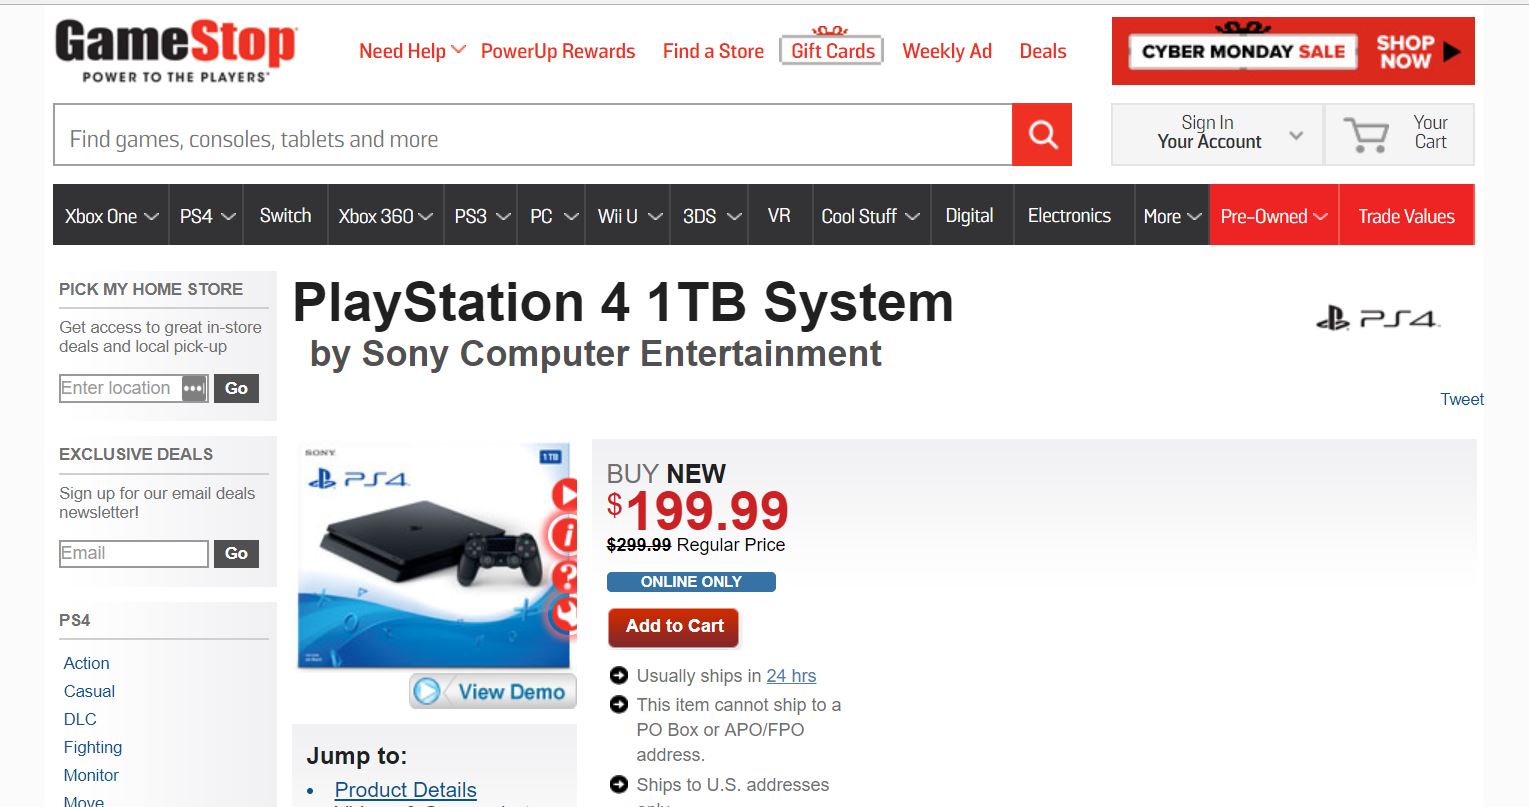 Web page showing PS4 priced at $199.99